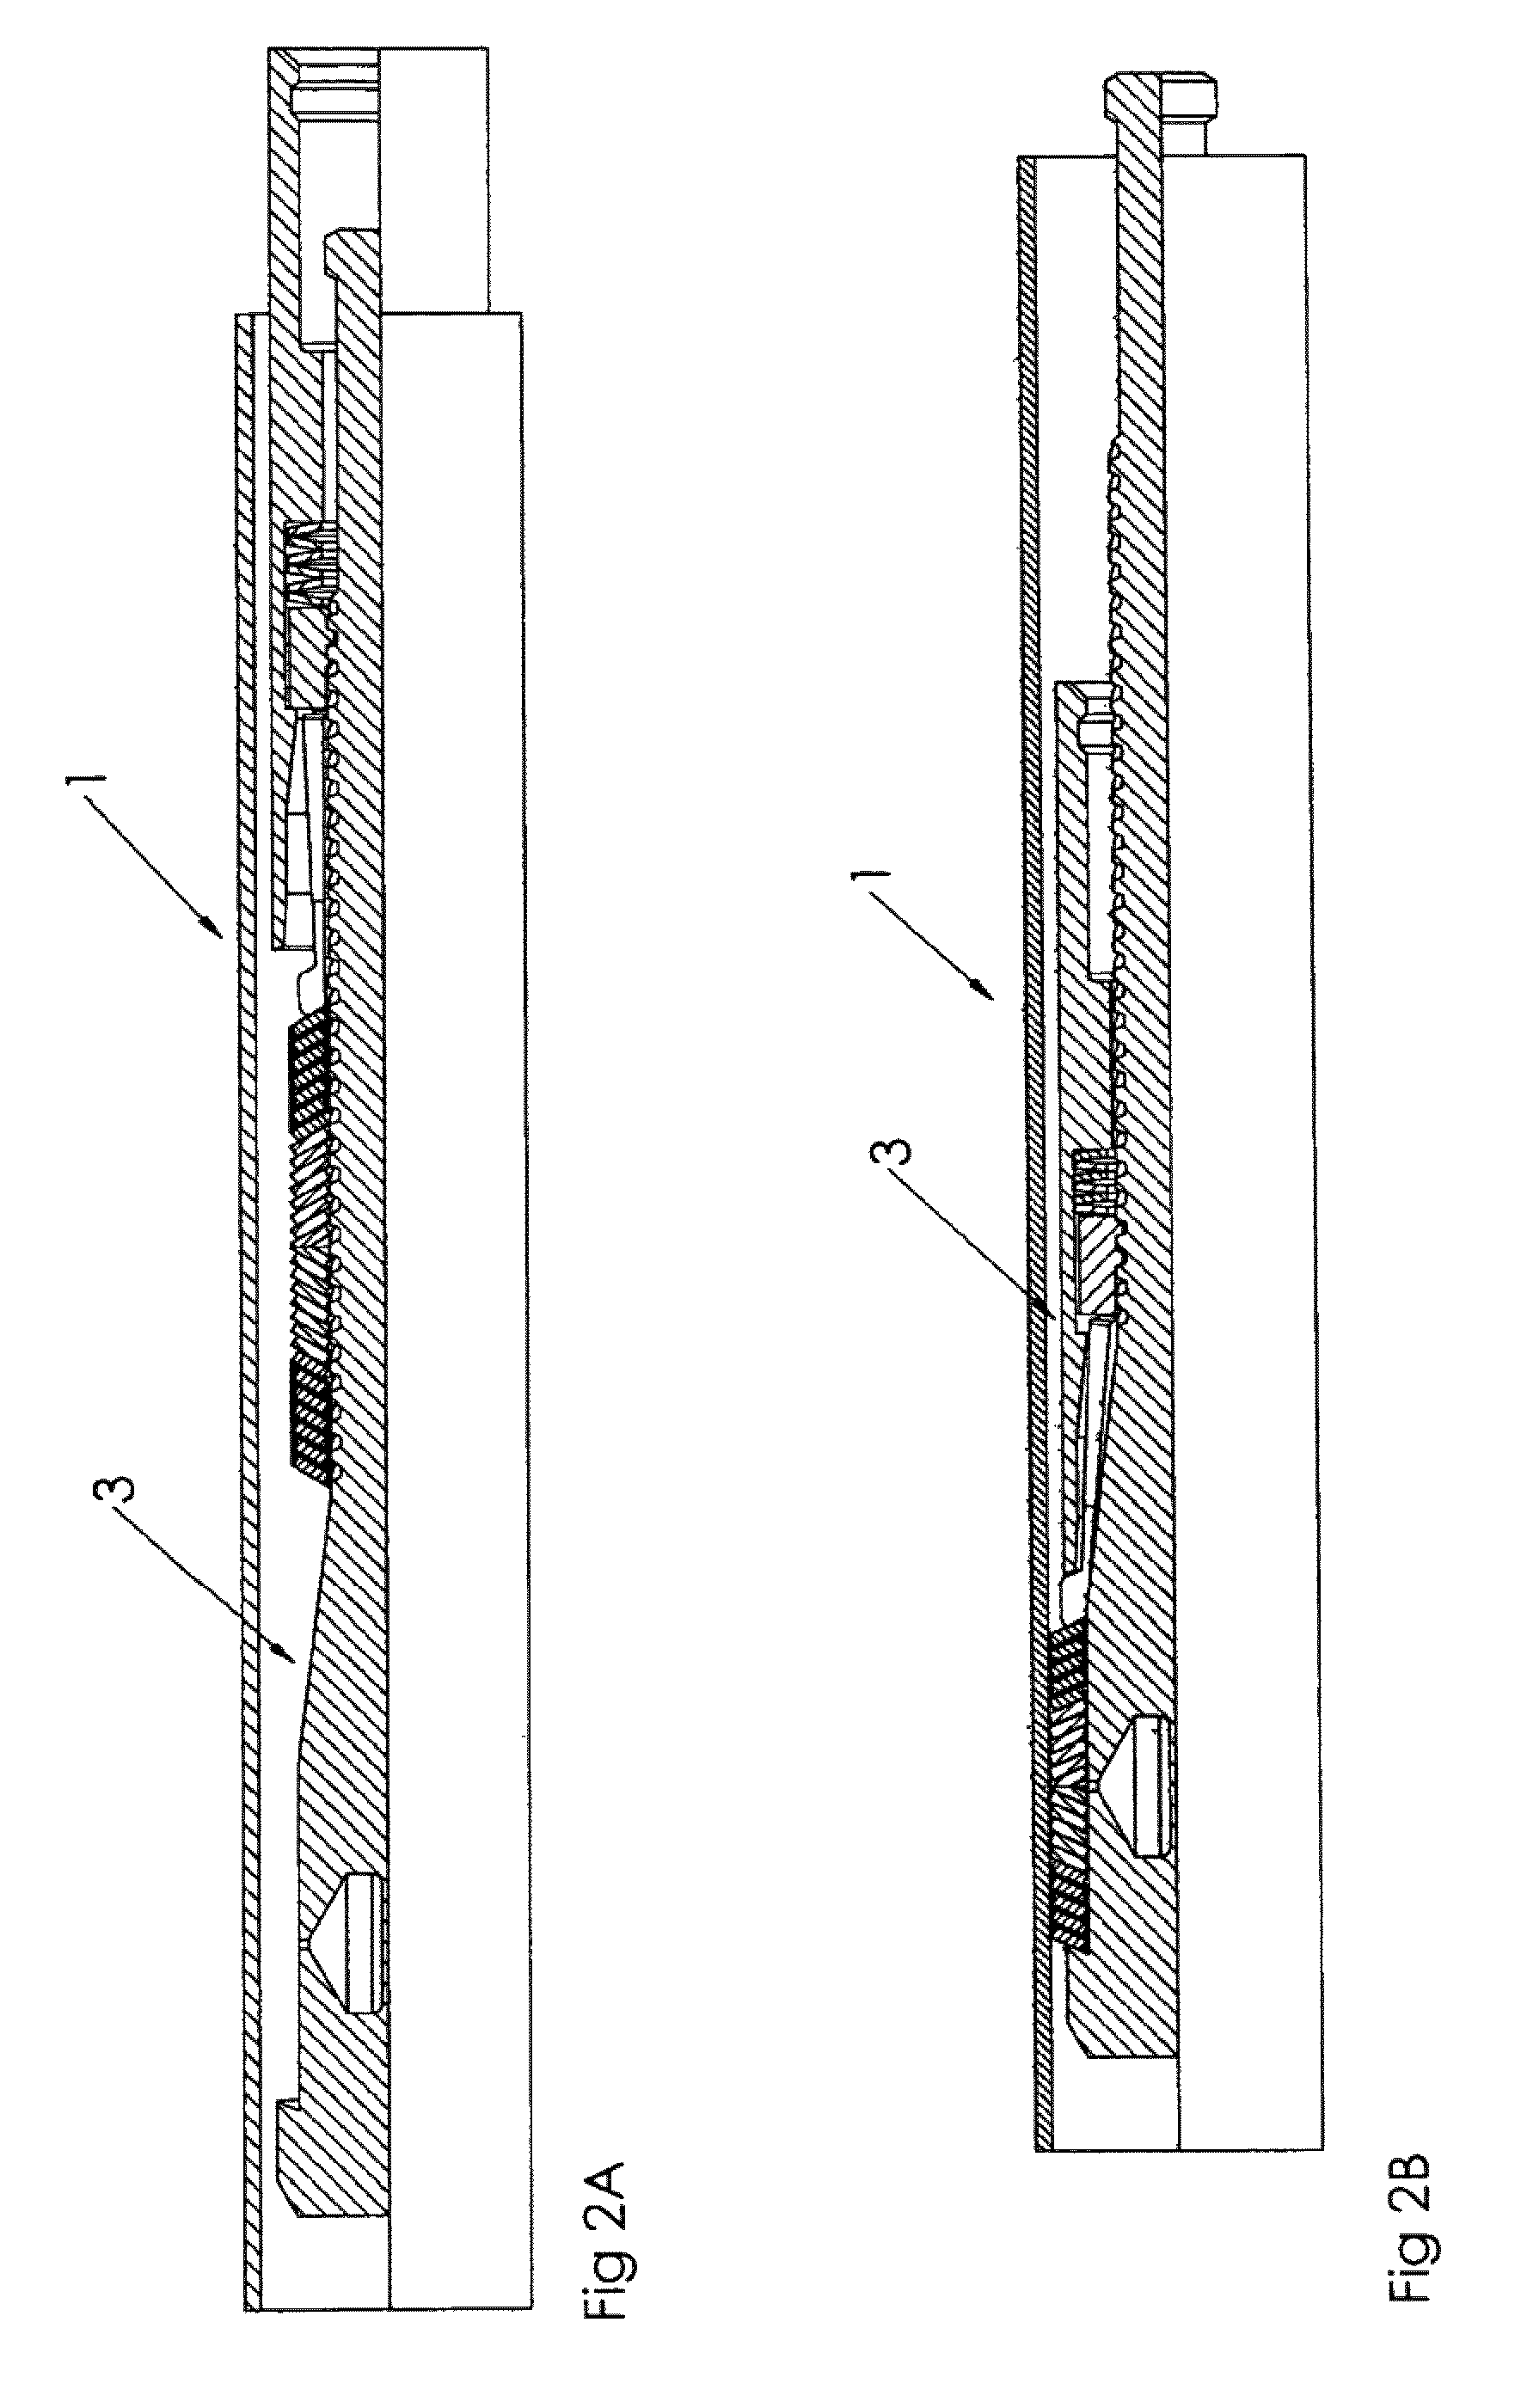 Sealing and anchoring device for use in a well